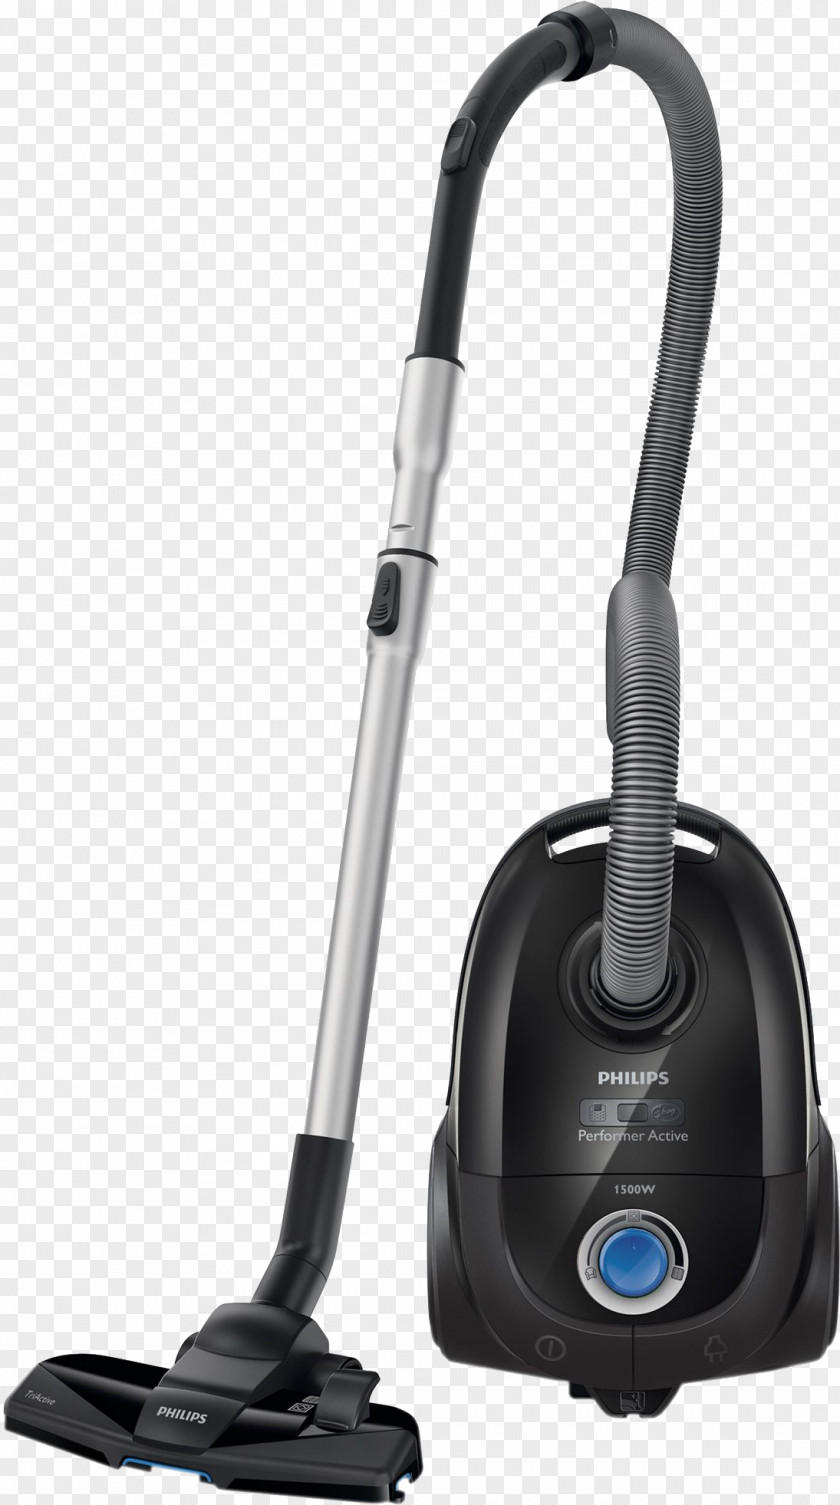 Vacuum CleanerCanisterBagDeep Black/green Philips FC8592/91Performer Active Fc8592/91 Cylinder 4L 1...Vacuum Cleaner Performer FC8660 Eco PNG